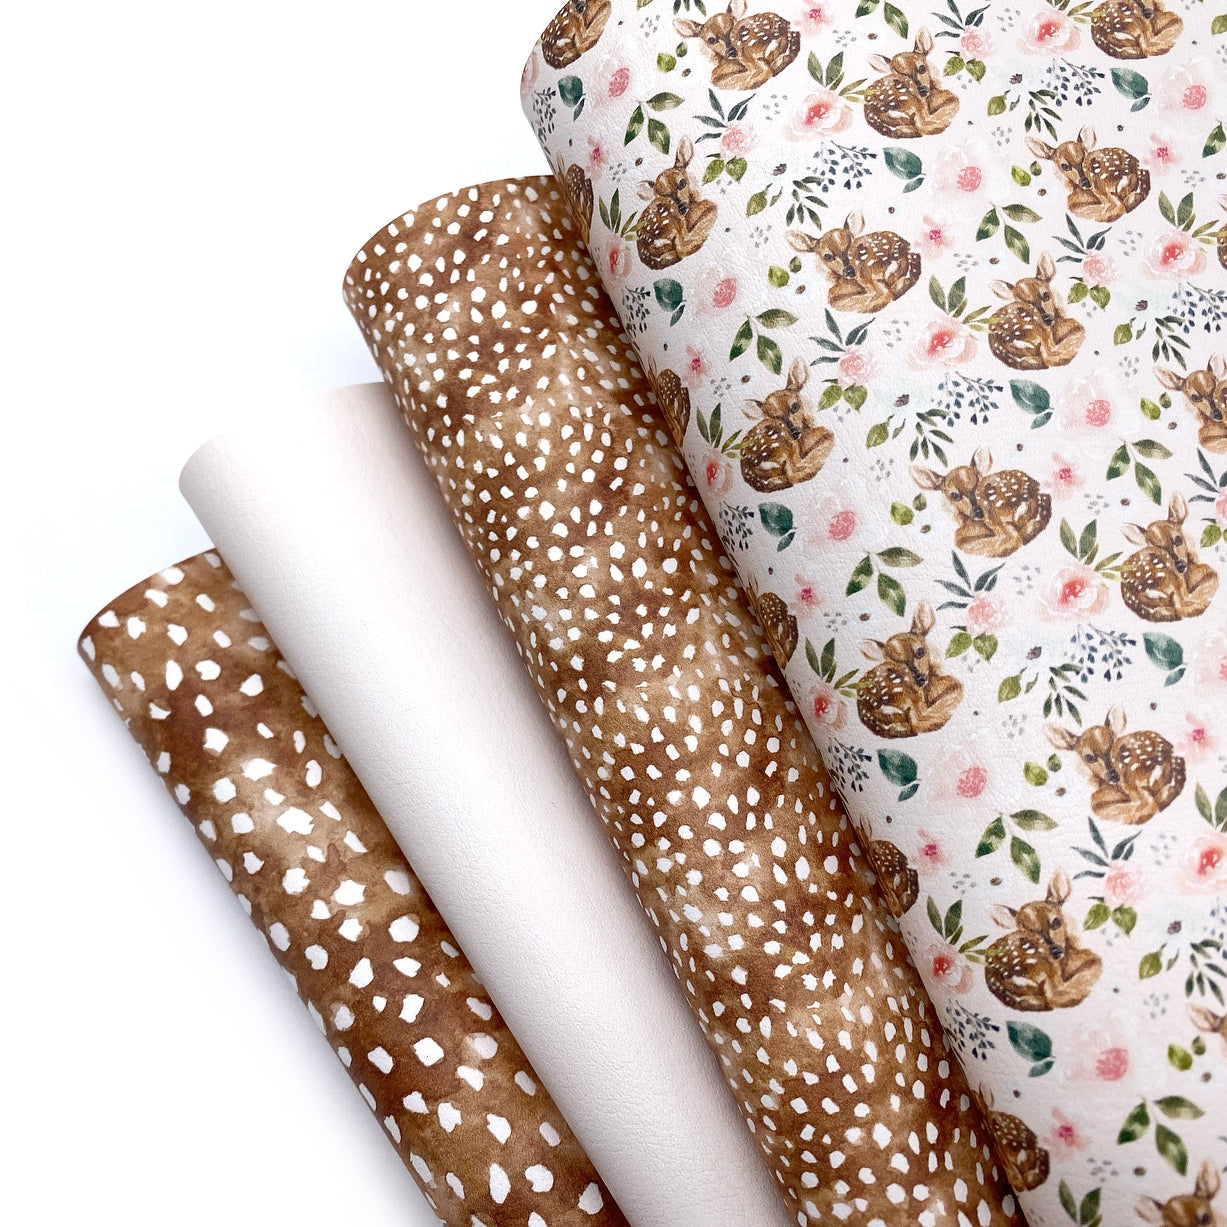 Freckled Fawn Premium Faux Leather Fabric Sheet Set